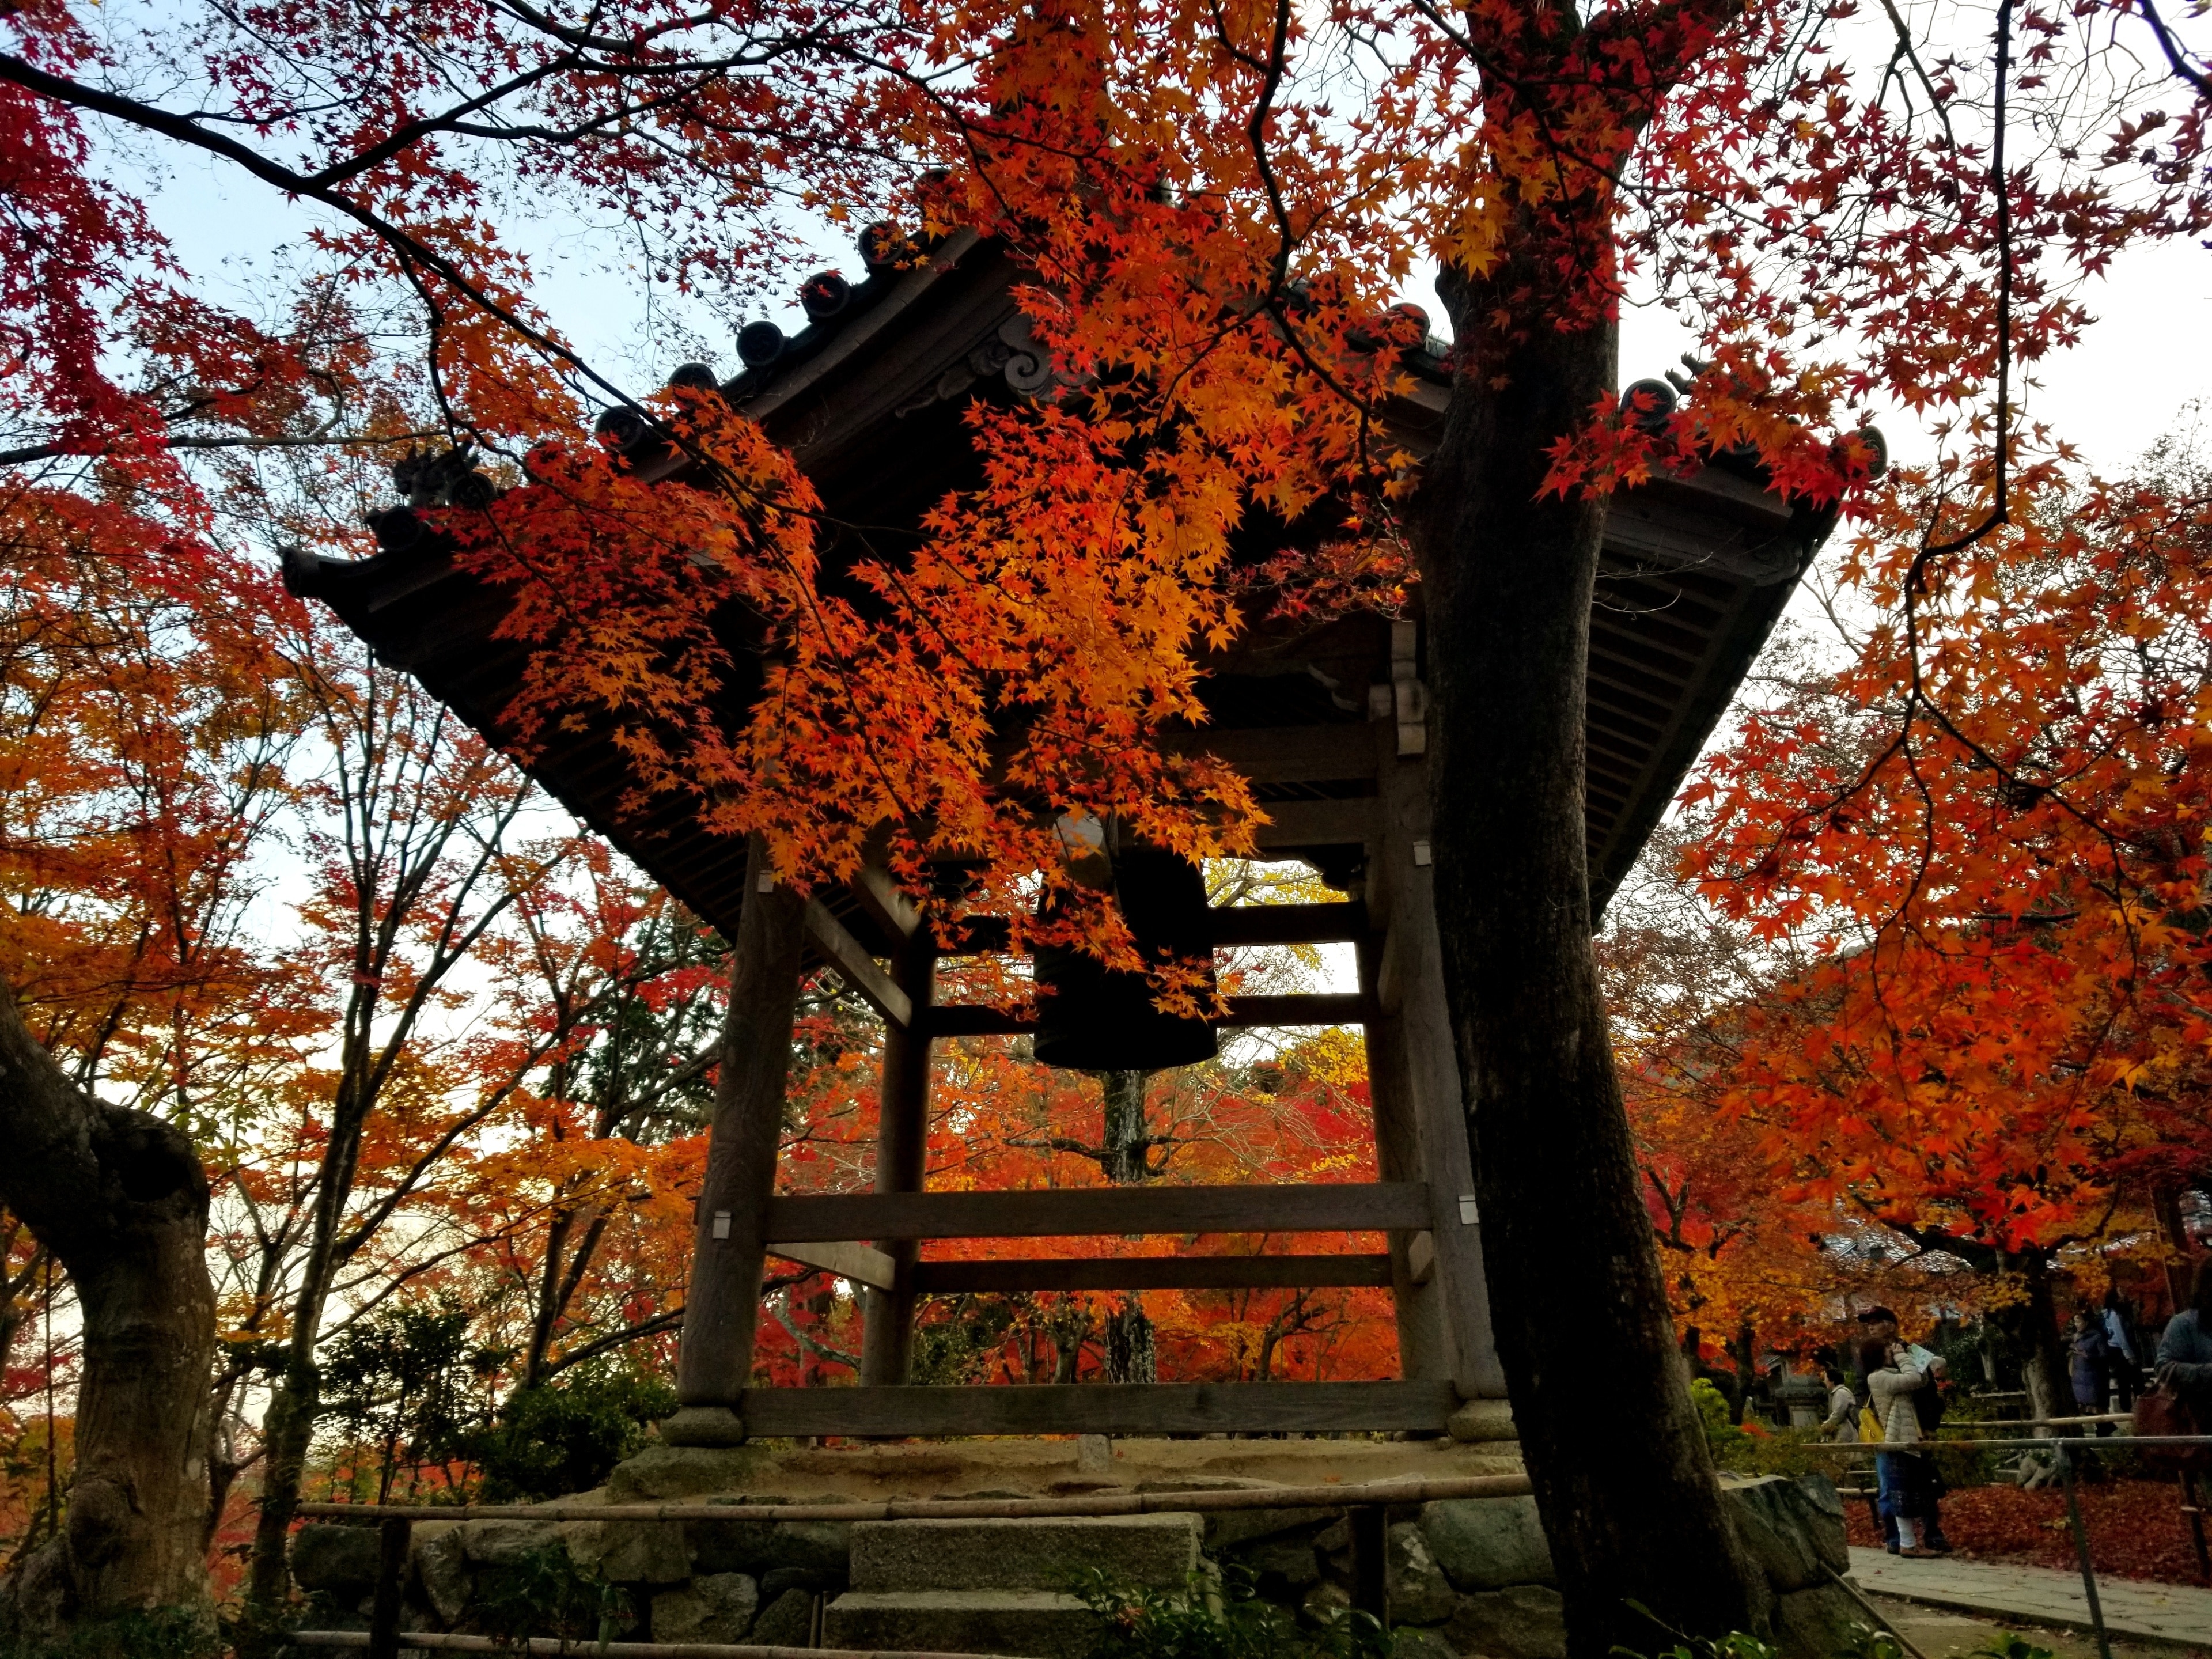 Jojakko-ji Temple is much less crowded than other temples in Kyoto and has stunning views of the city at the top of the stairs. Visiting in the Fall when the leaves turn red is a must!
#LifeAtExpedia